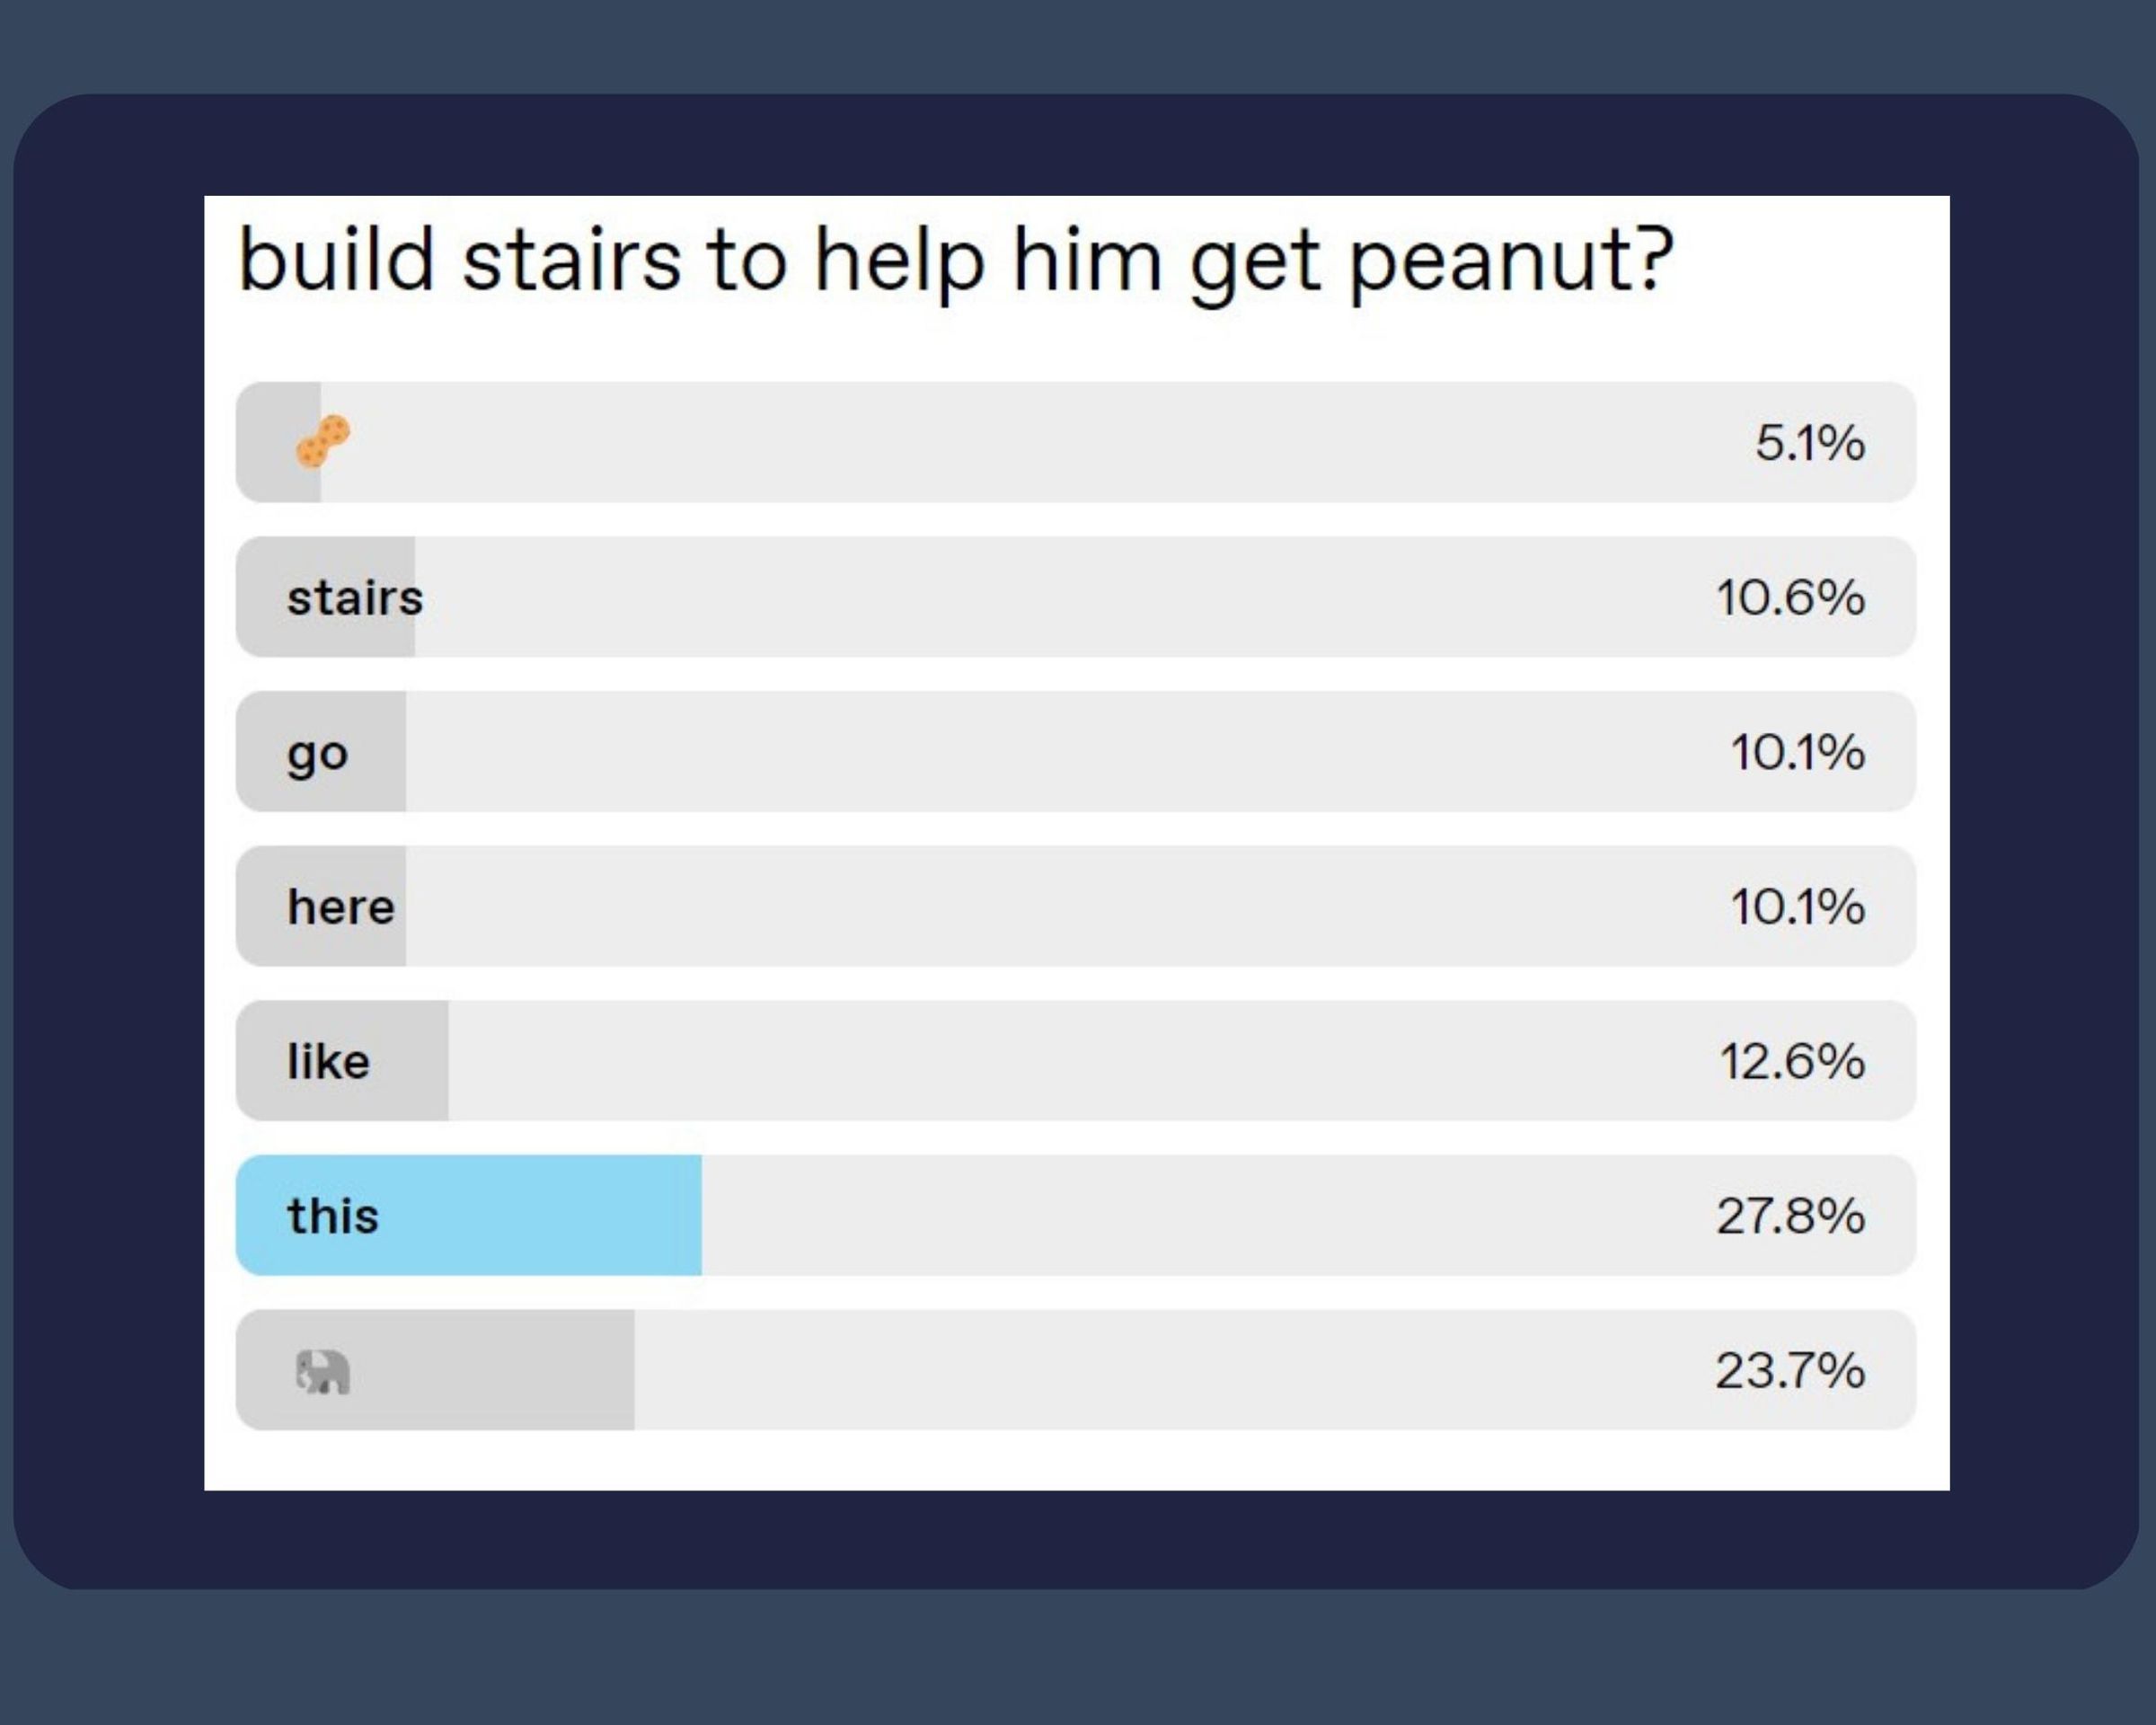 A Tumblr poll designed into a game where voters needs to build some stairs using the bar graph results to lead an elephant to a peanut.